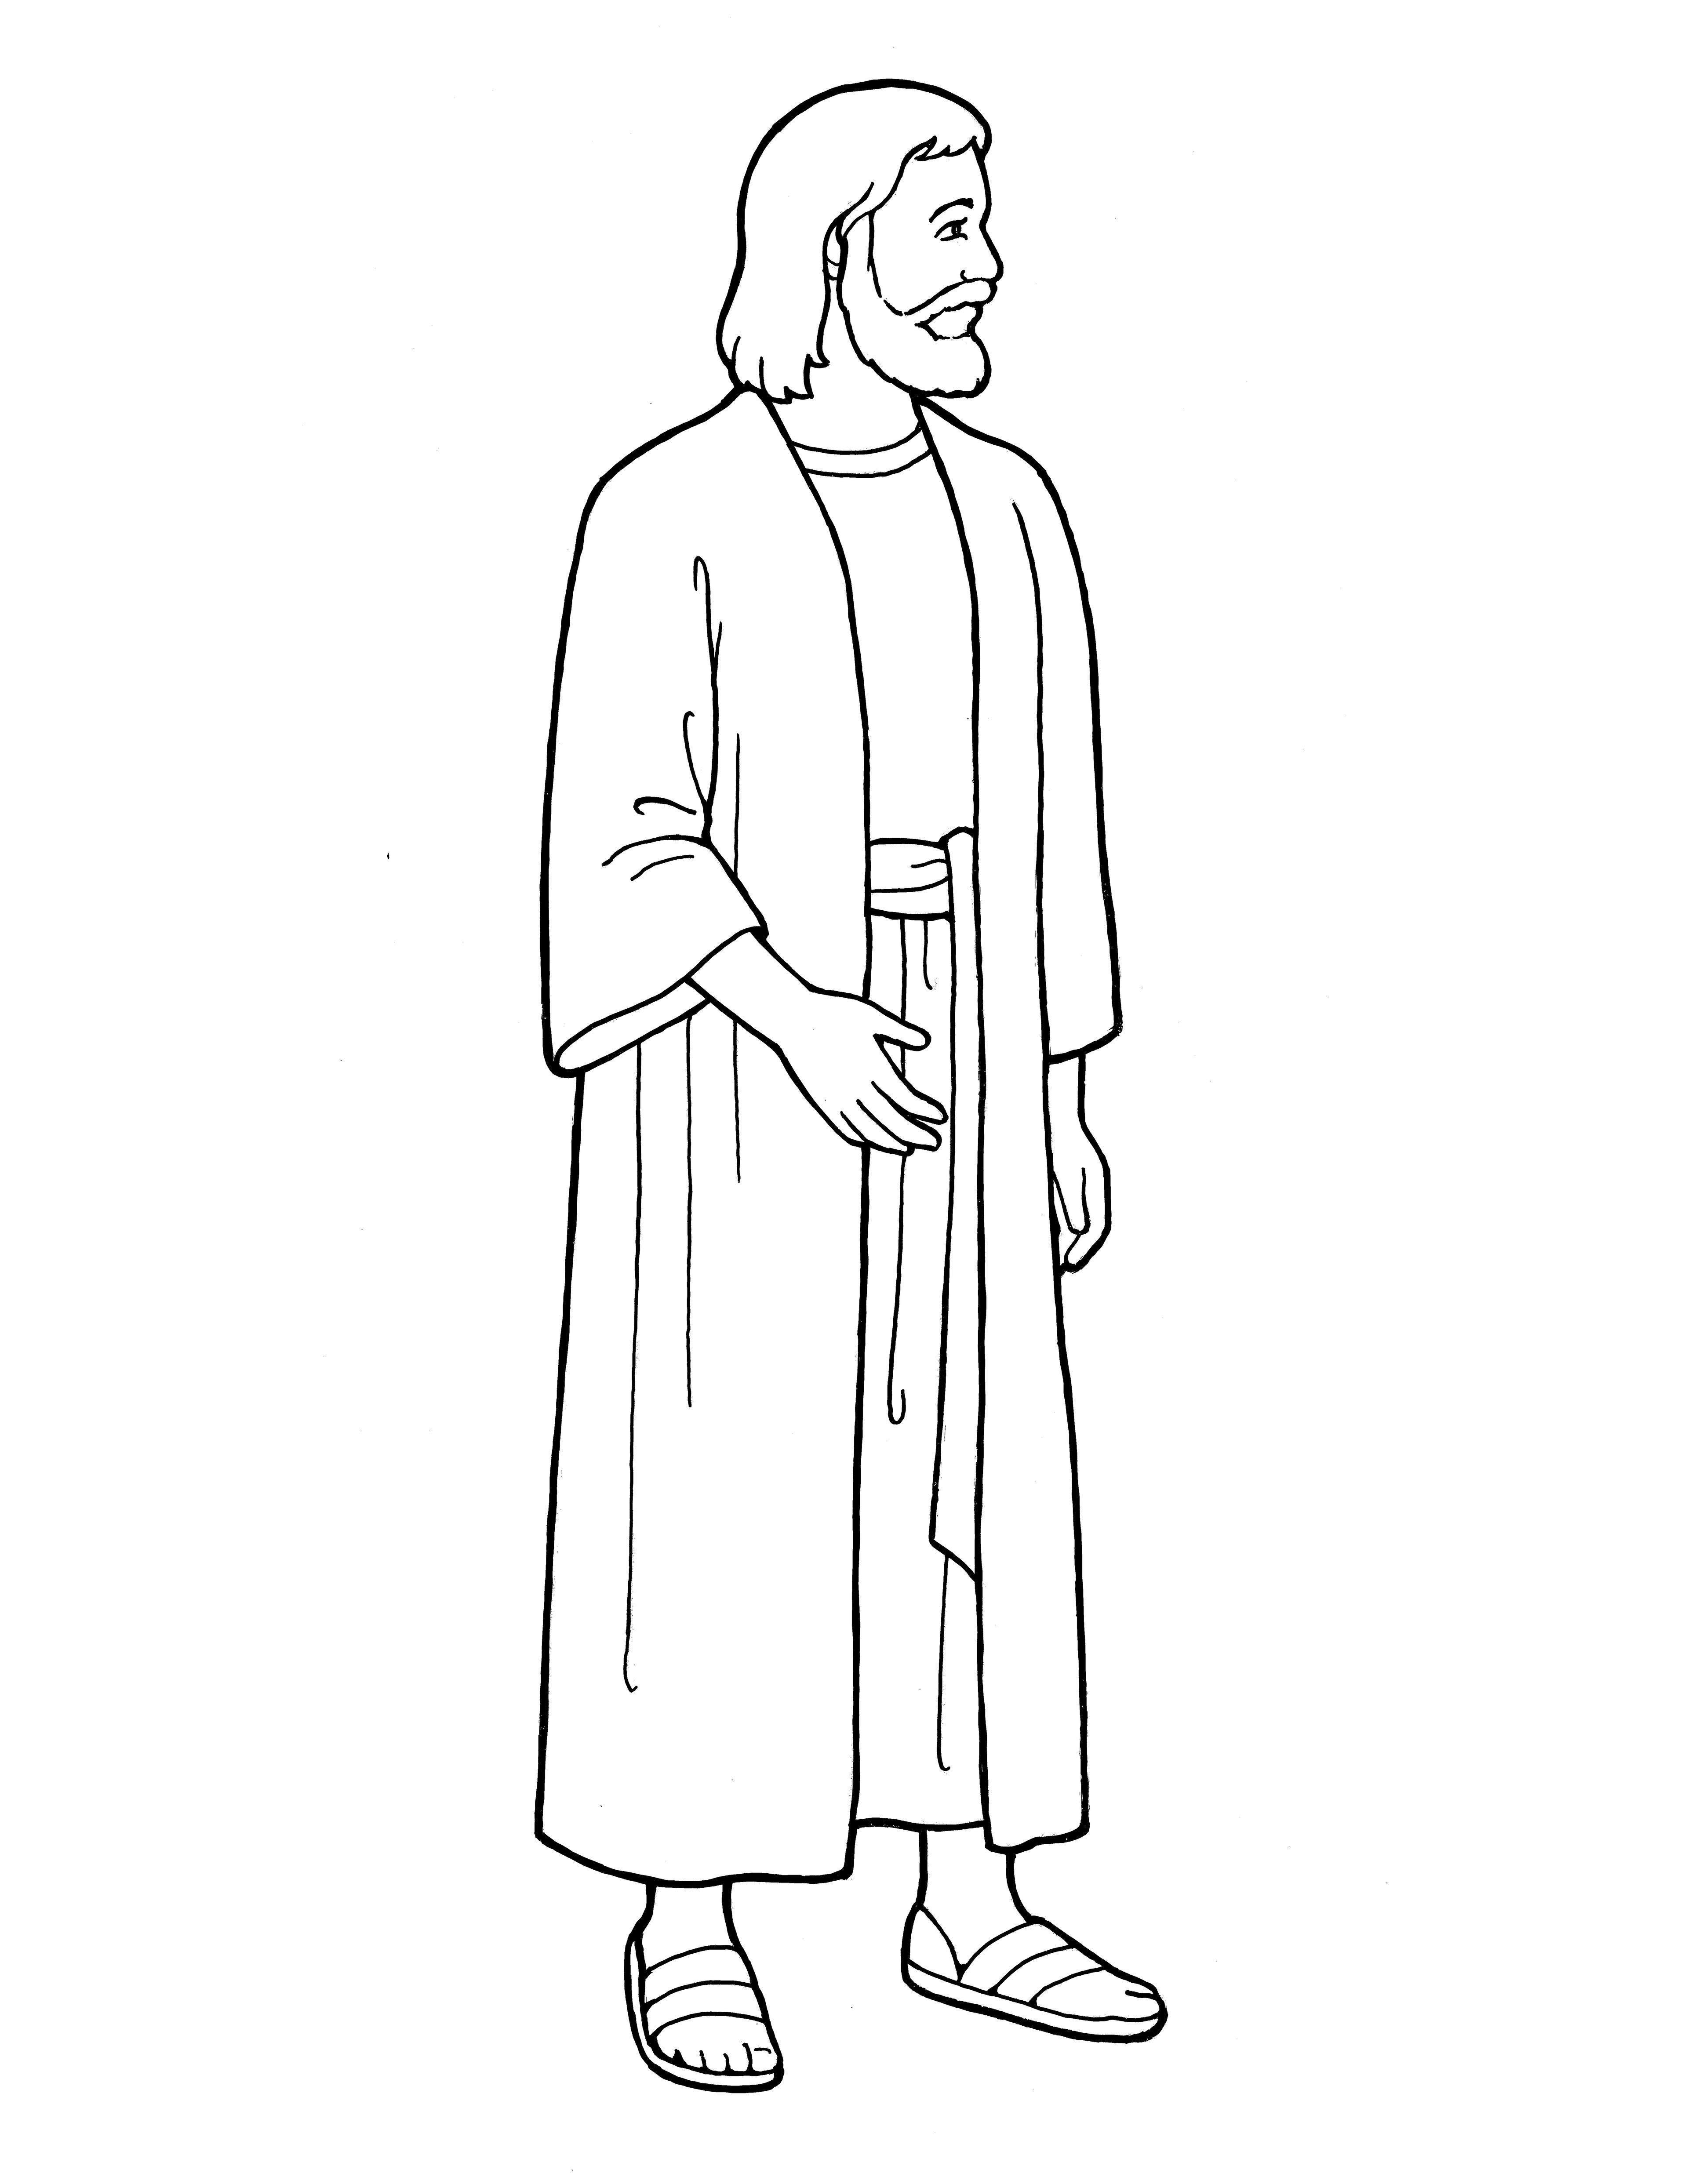 An illustration of Christ standing, from the nursery manual Behold Your Little Ones (2008), page 123.